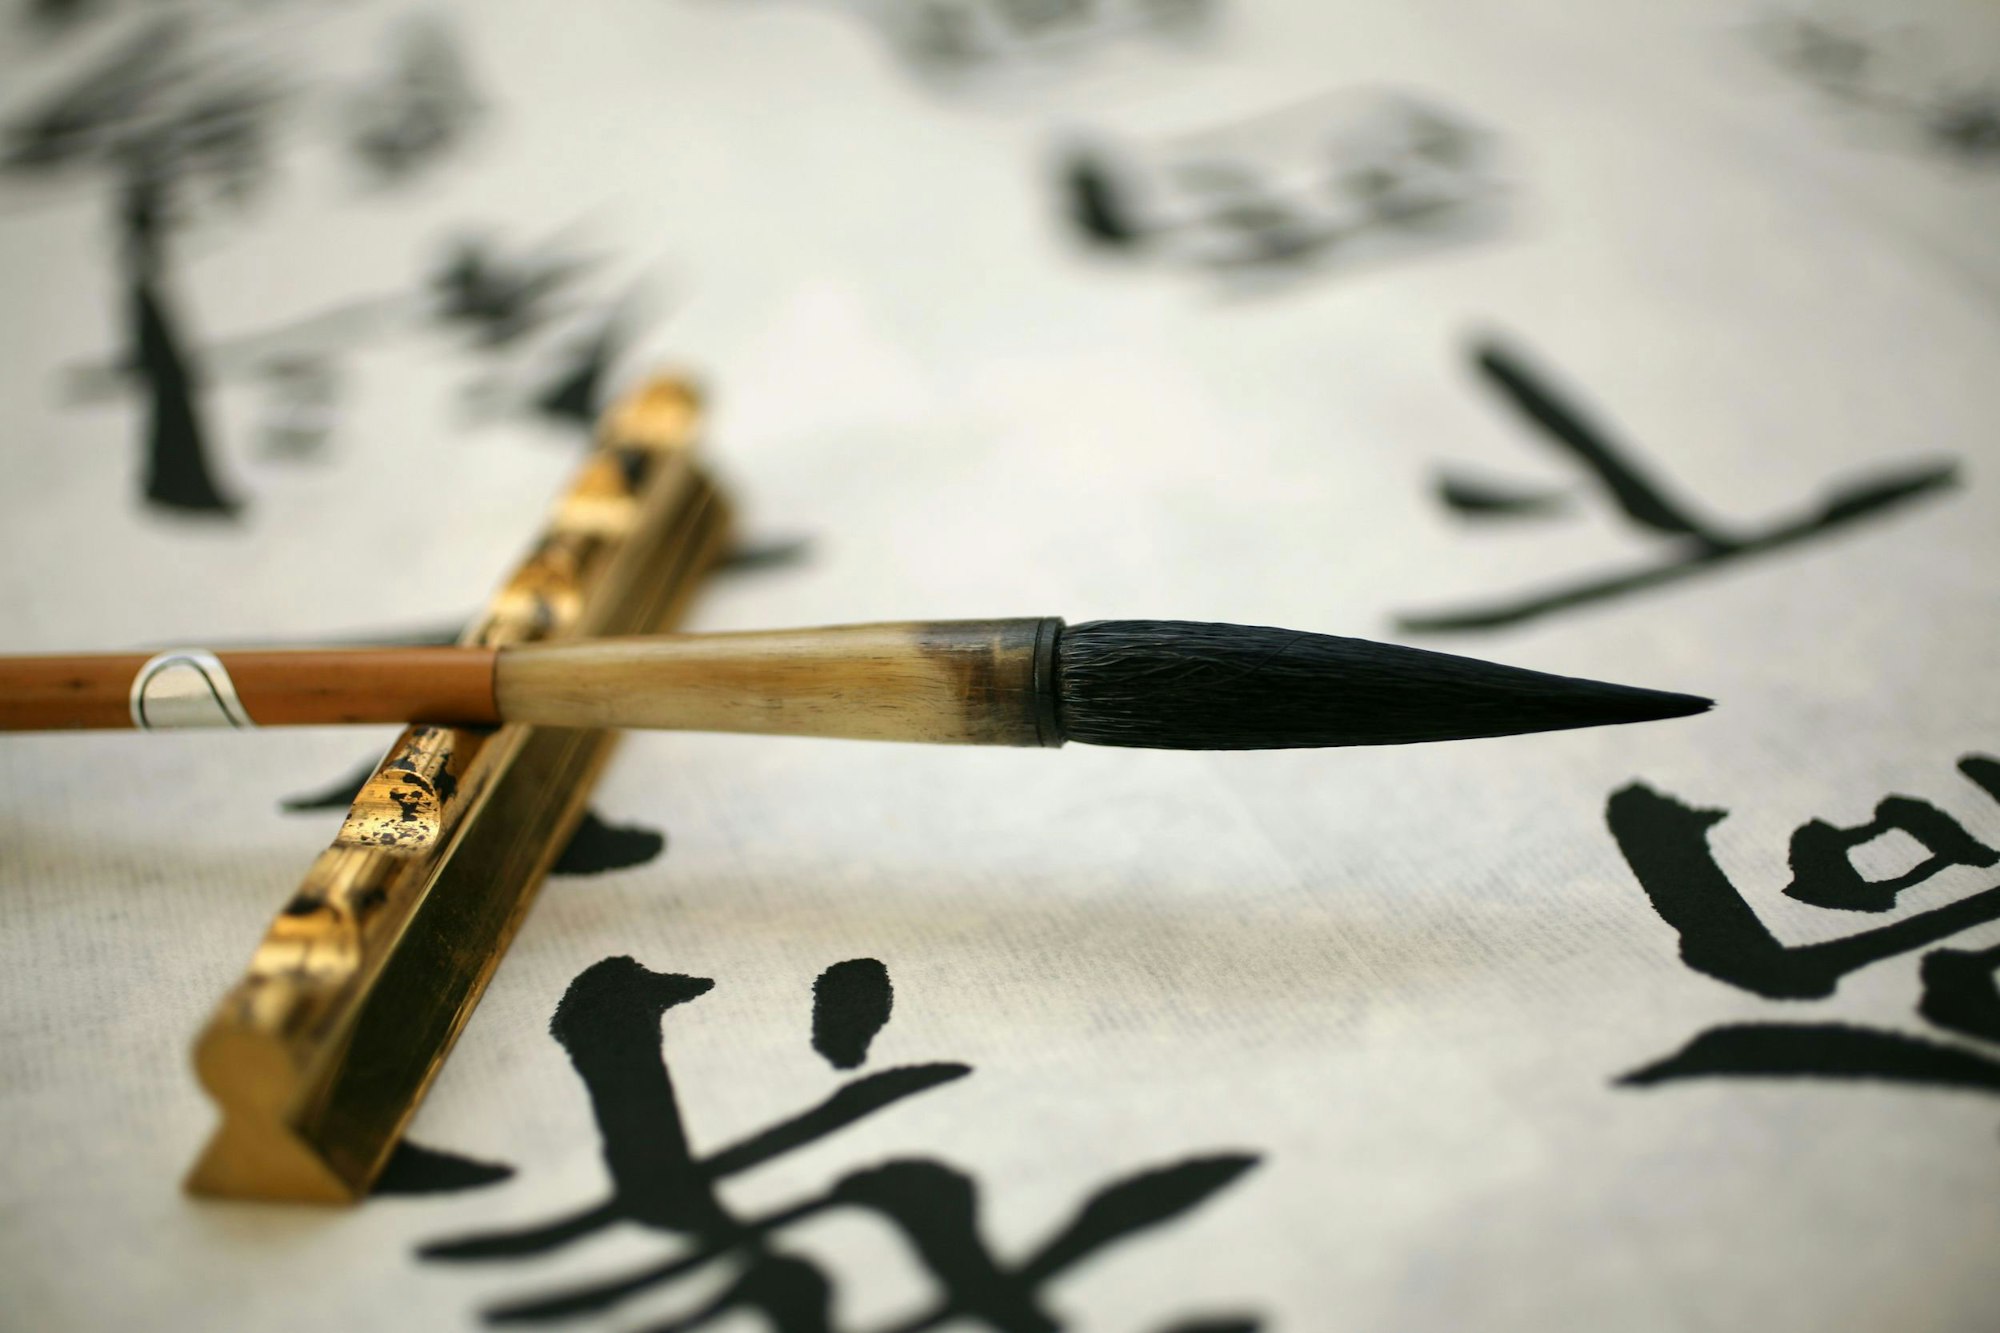 Chinese calligraphy, photo Yen Wen Getty Images